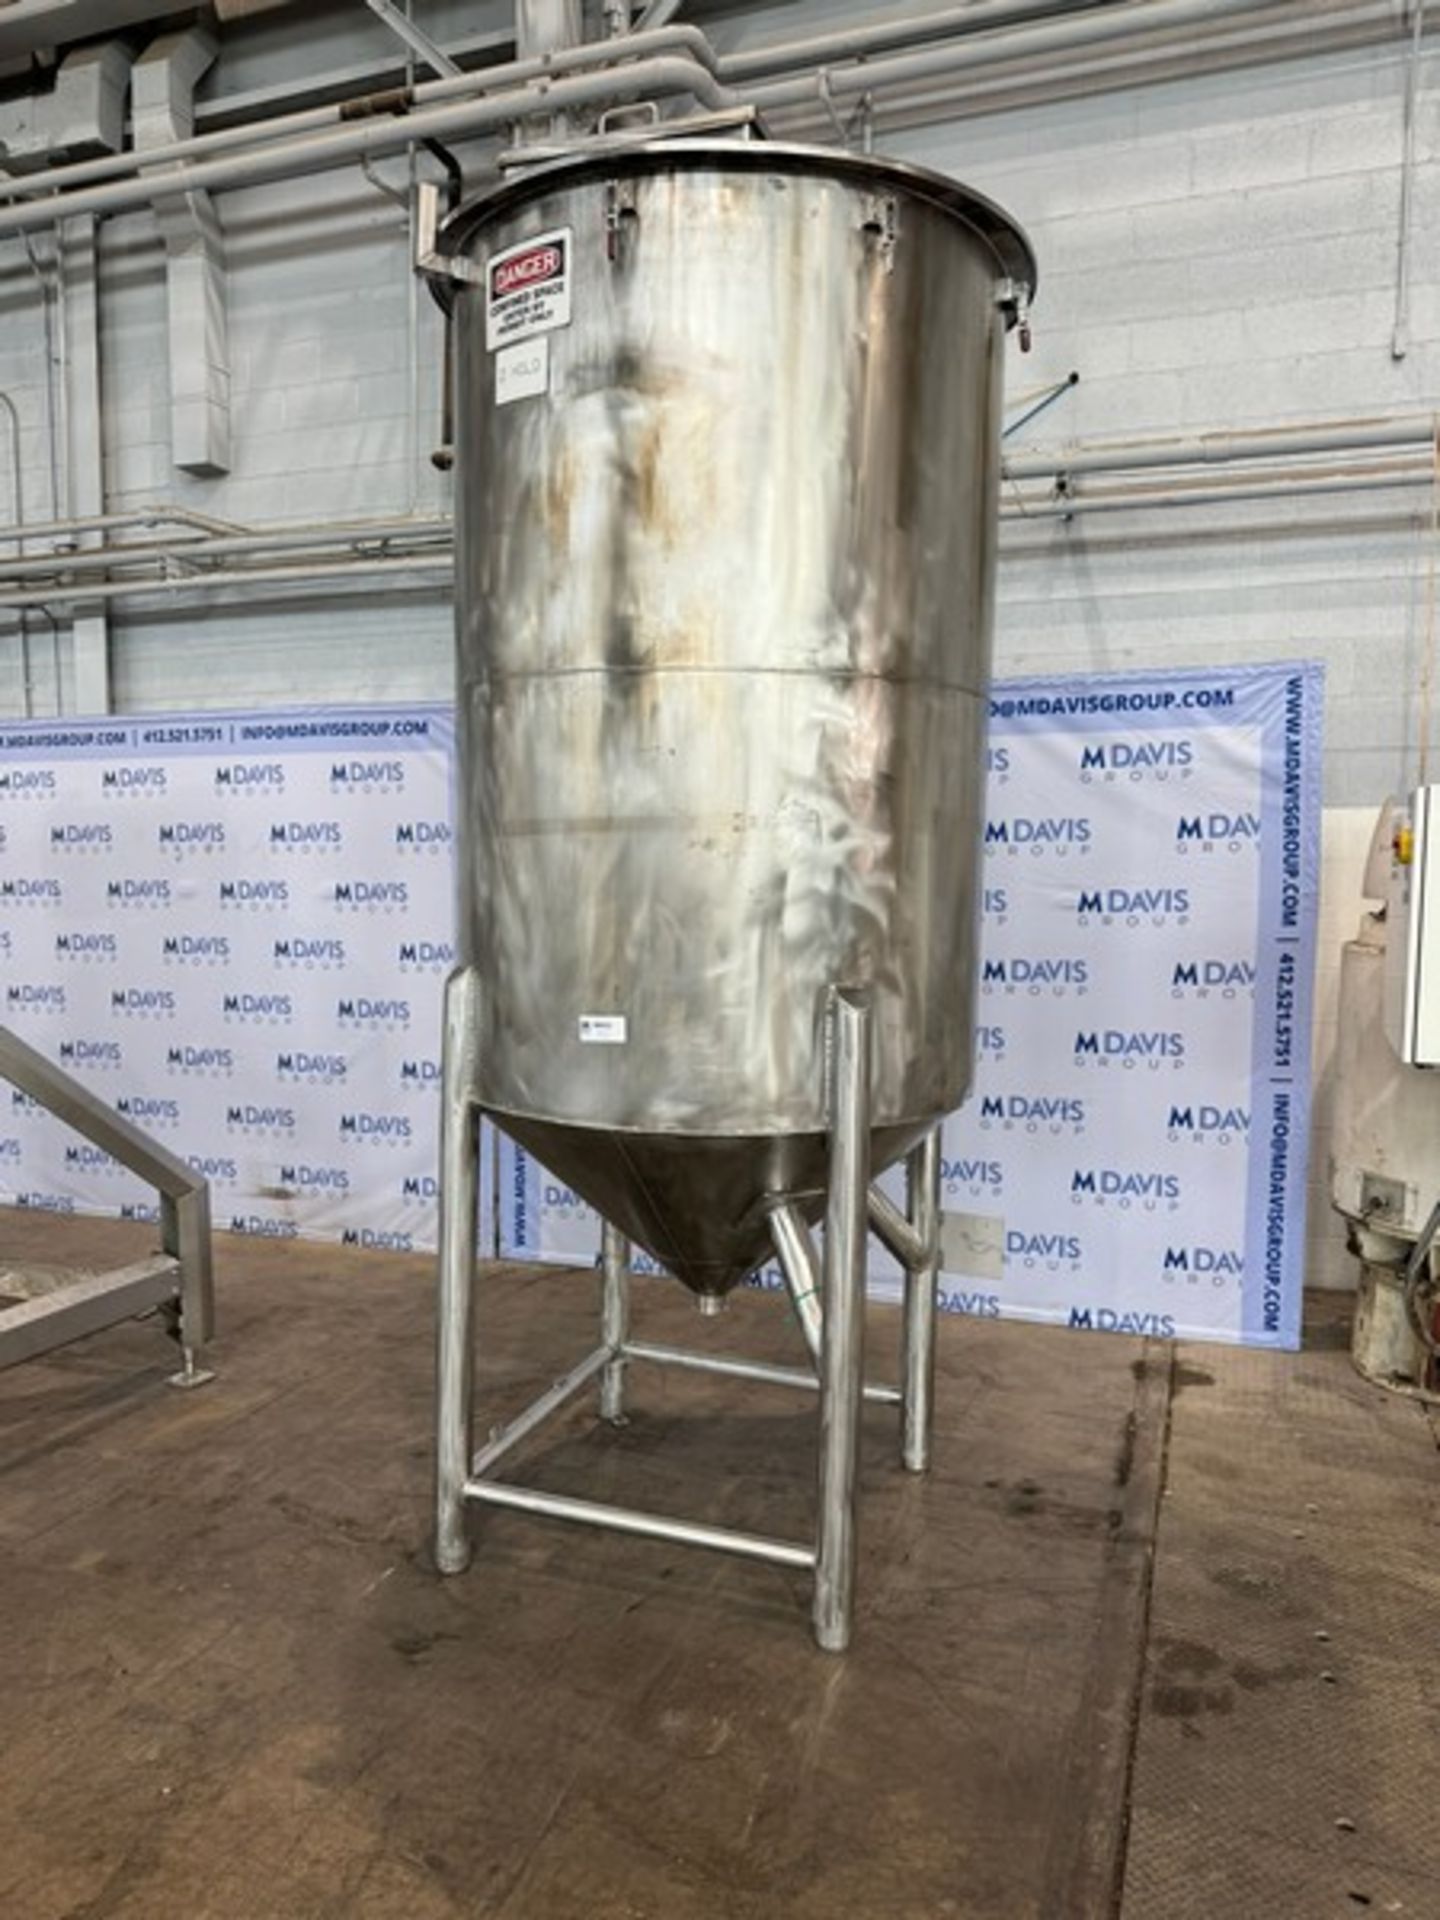 Aprox. 500 Gal. S/S Single Wall Tank, Vessel Dims.: Aprox. 70" Tall x 48" Dia., with Cone Bottom,